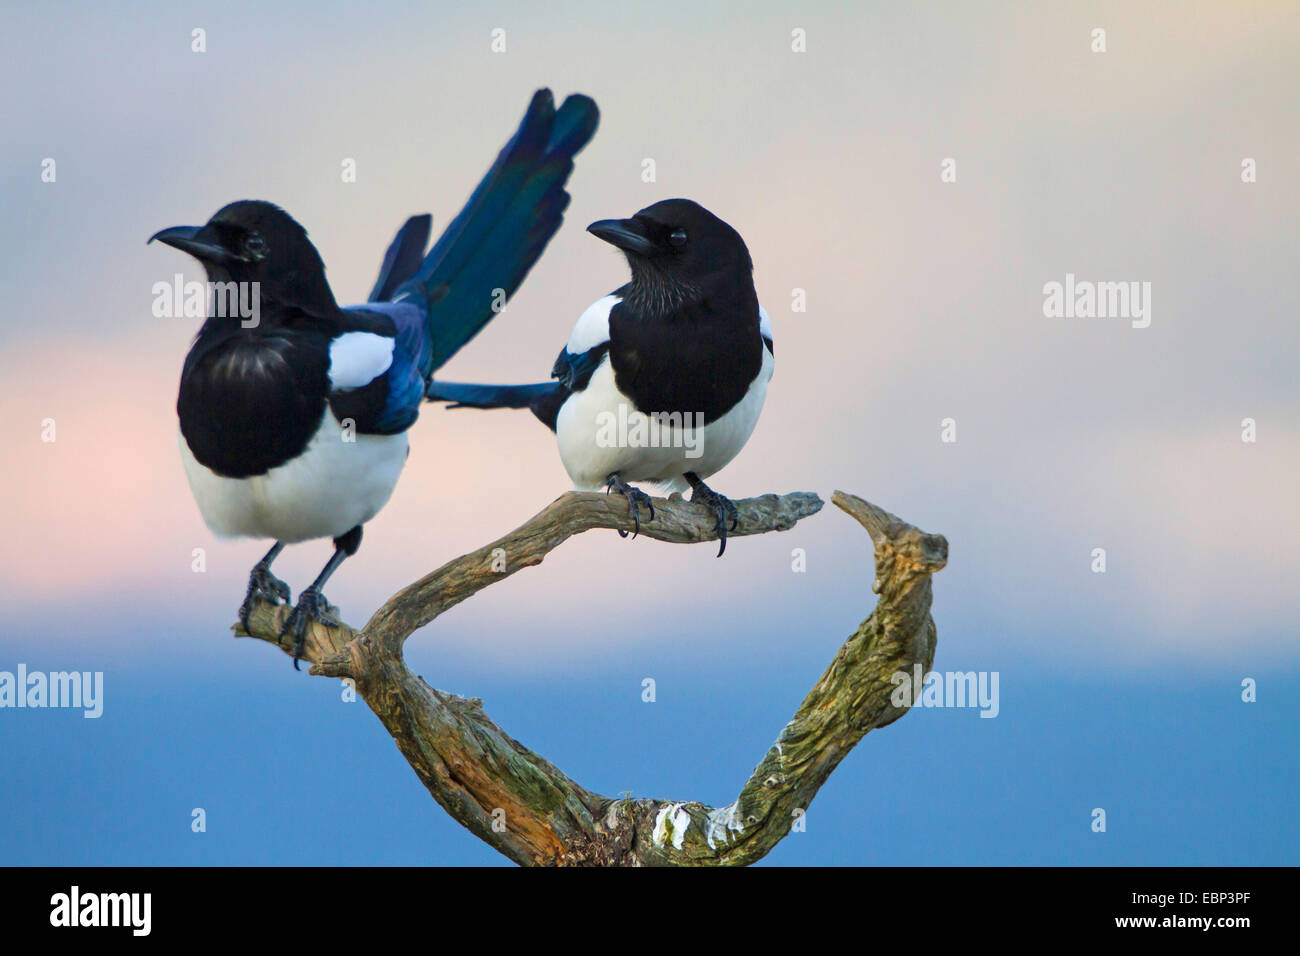 black-billed magpie (Pica pica), two black-billed magpies sitting on a twig, Norway, Trondheim Stock Photo